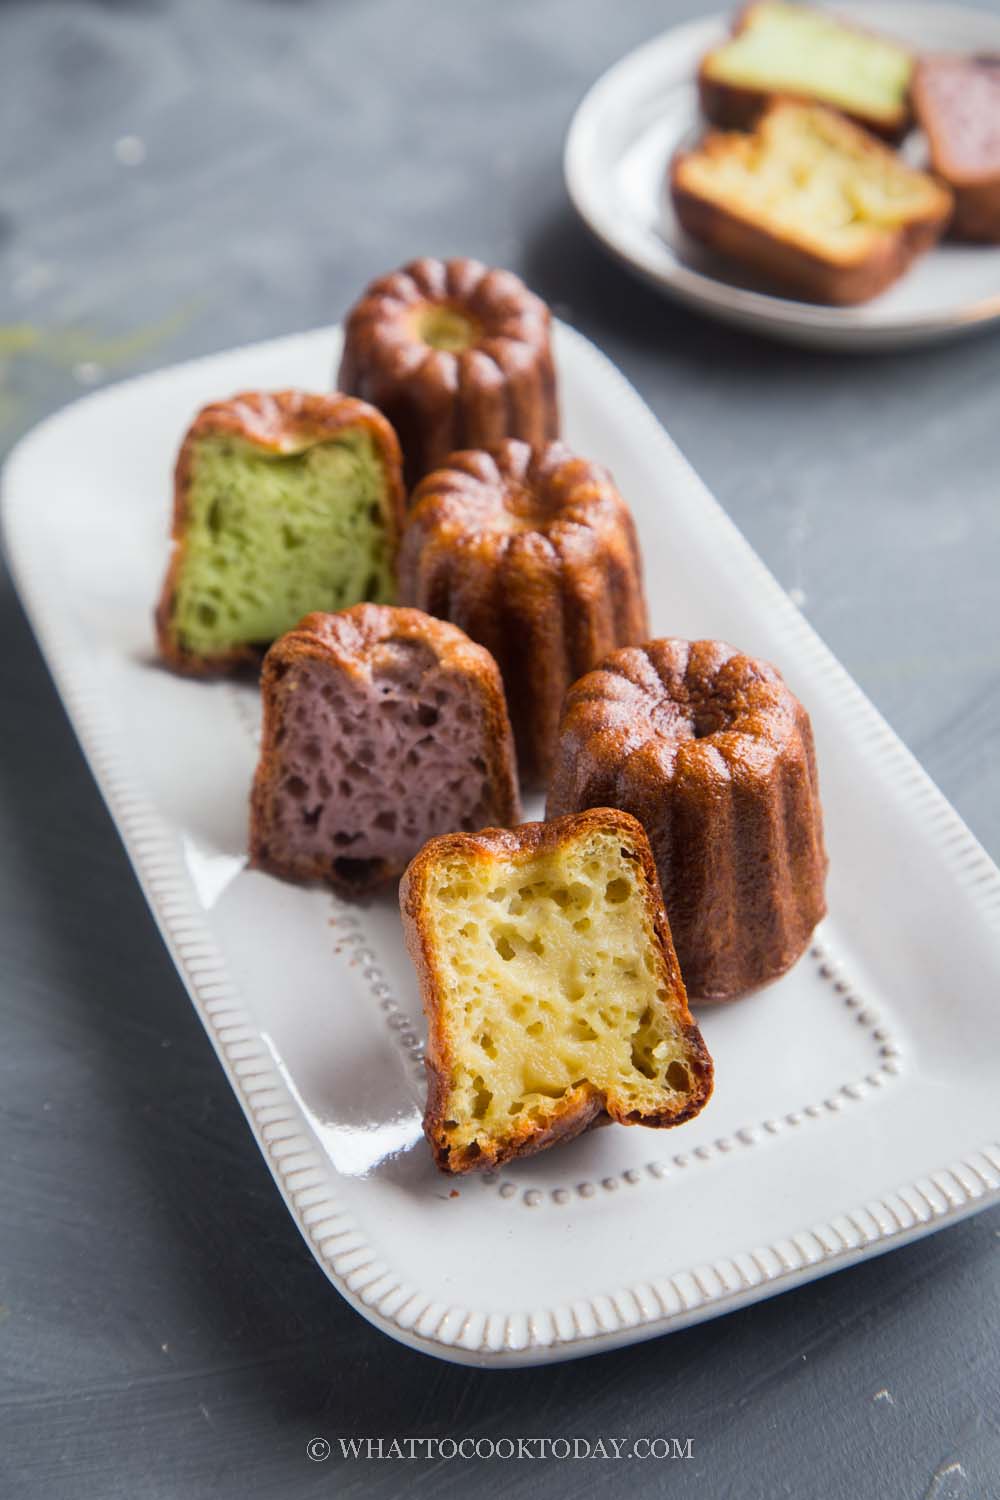 Canelé | Traditional Sweet Pastry From Bordeaux, France